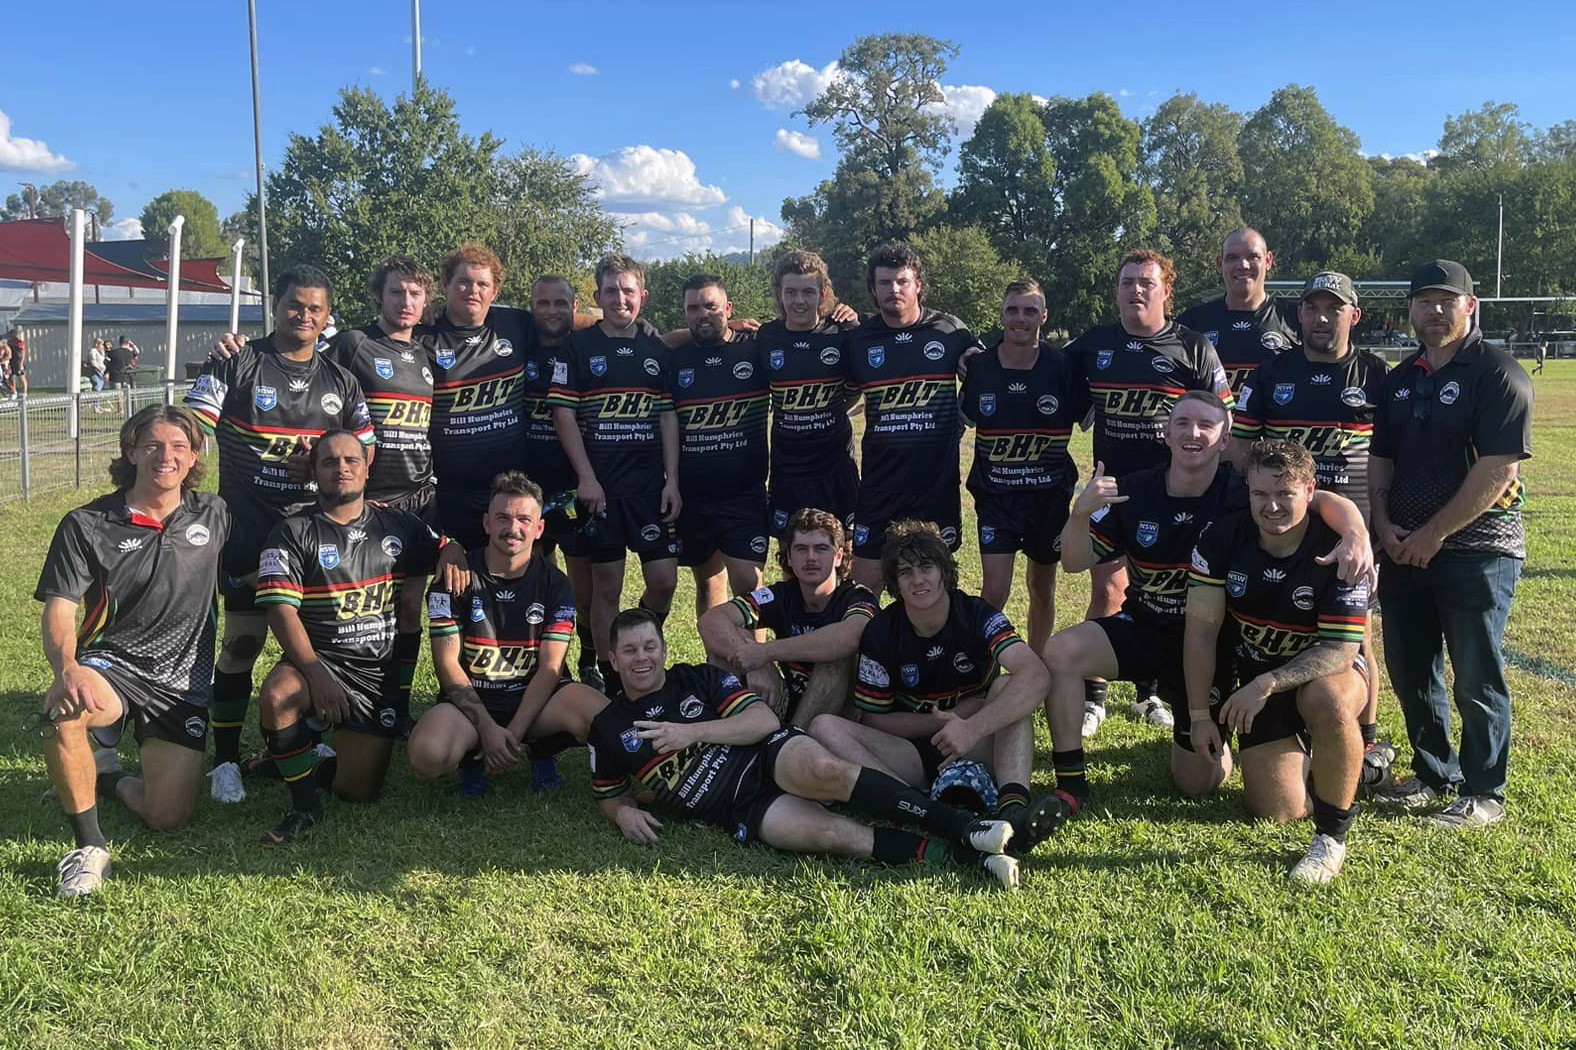 Wee Waa Panthers proud of their long-awaited return to Group 4 Rugby League competition